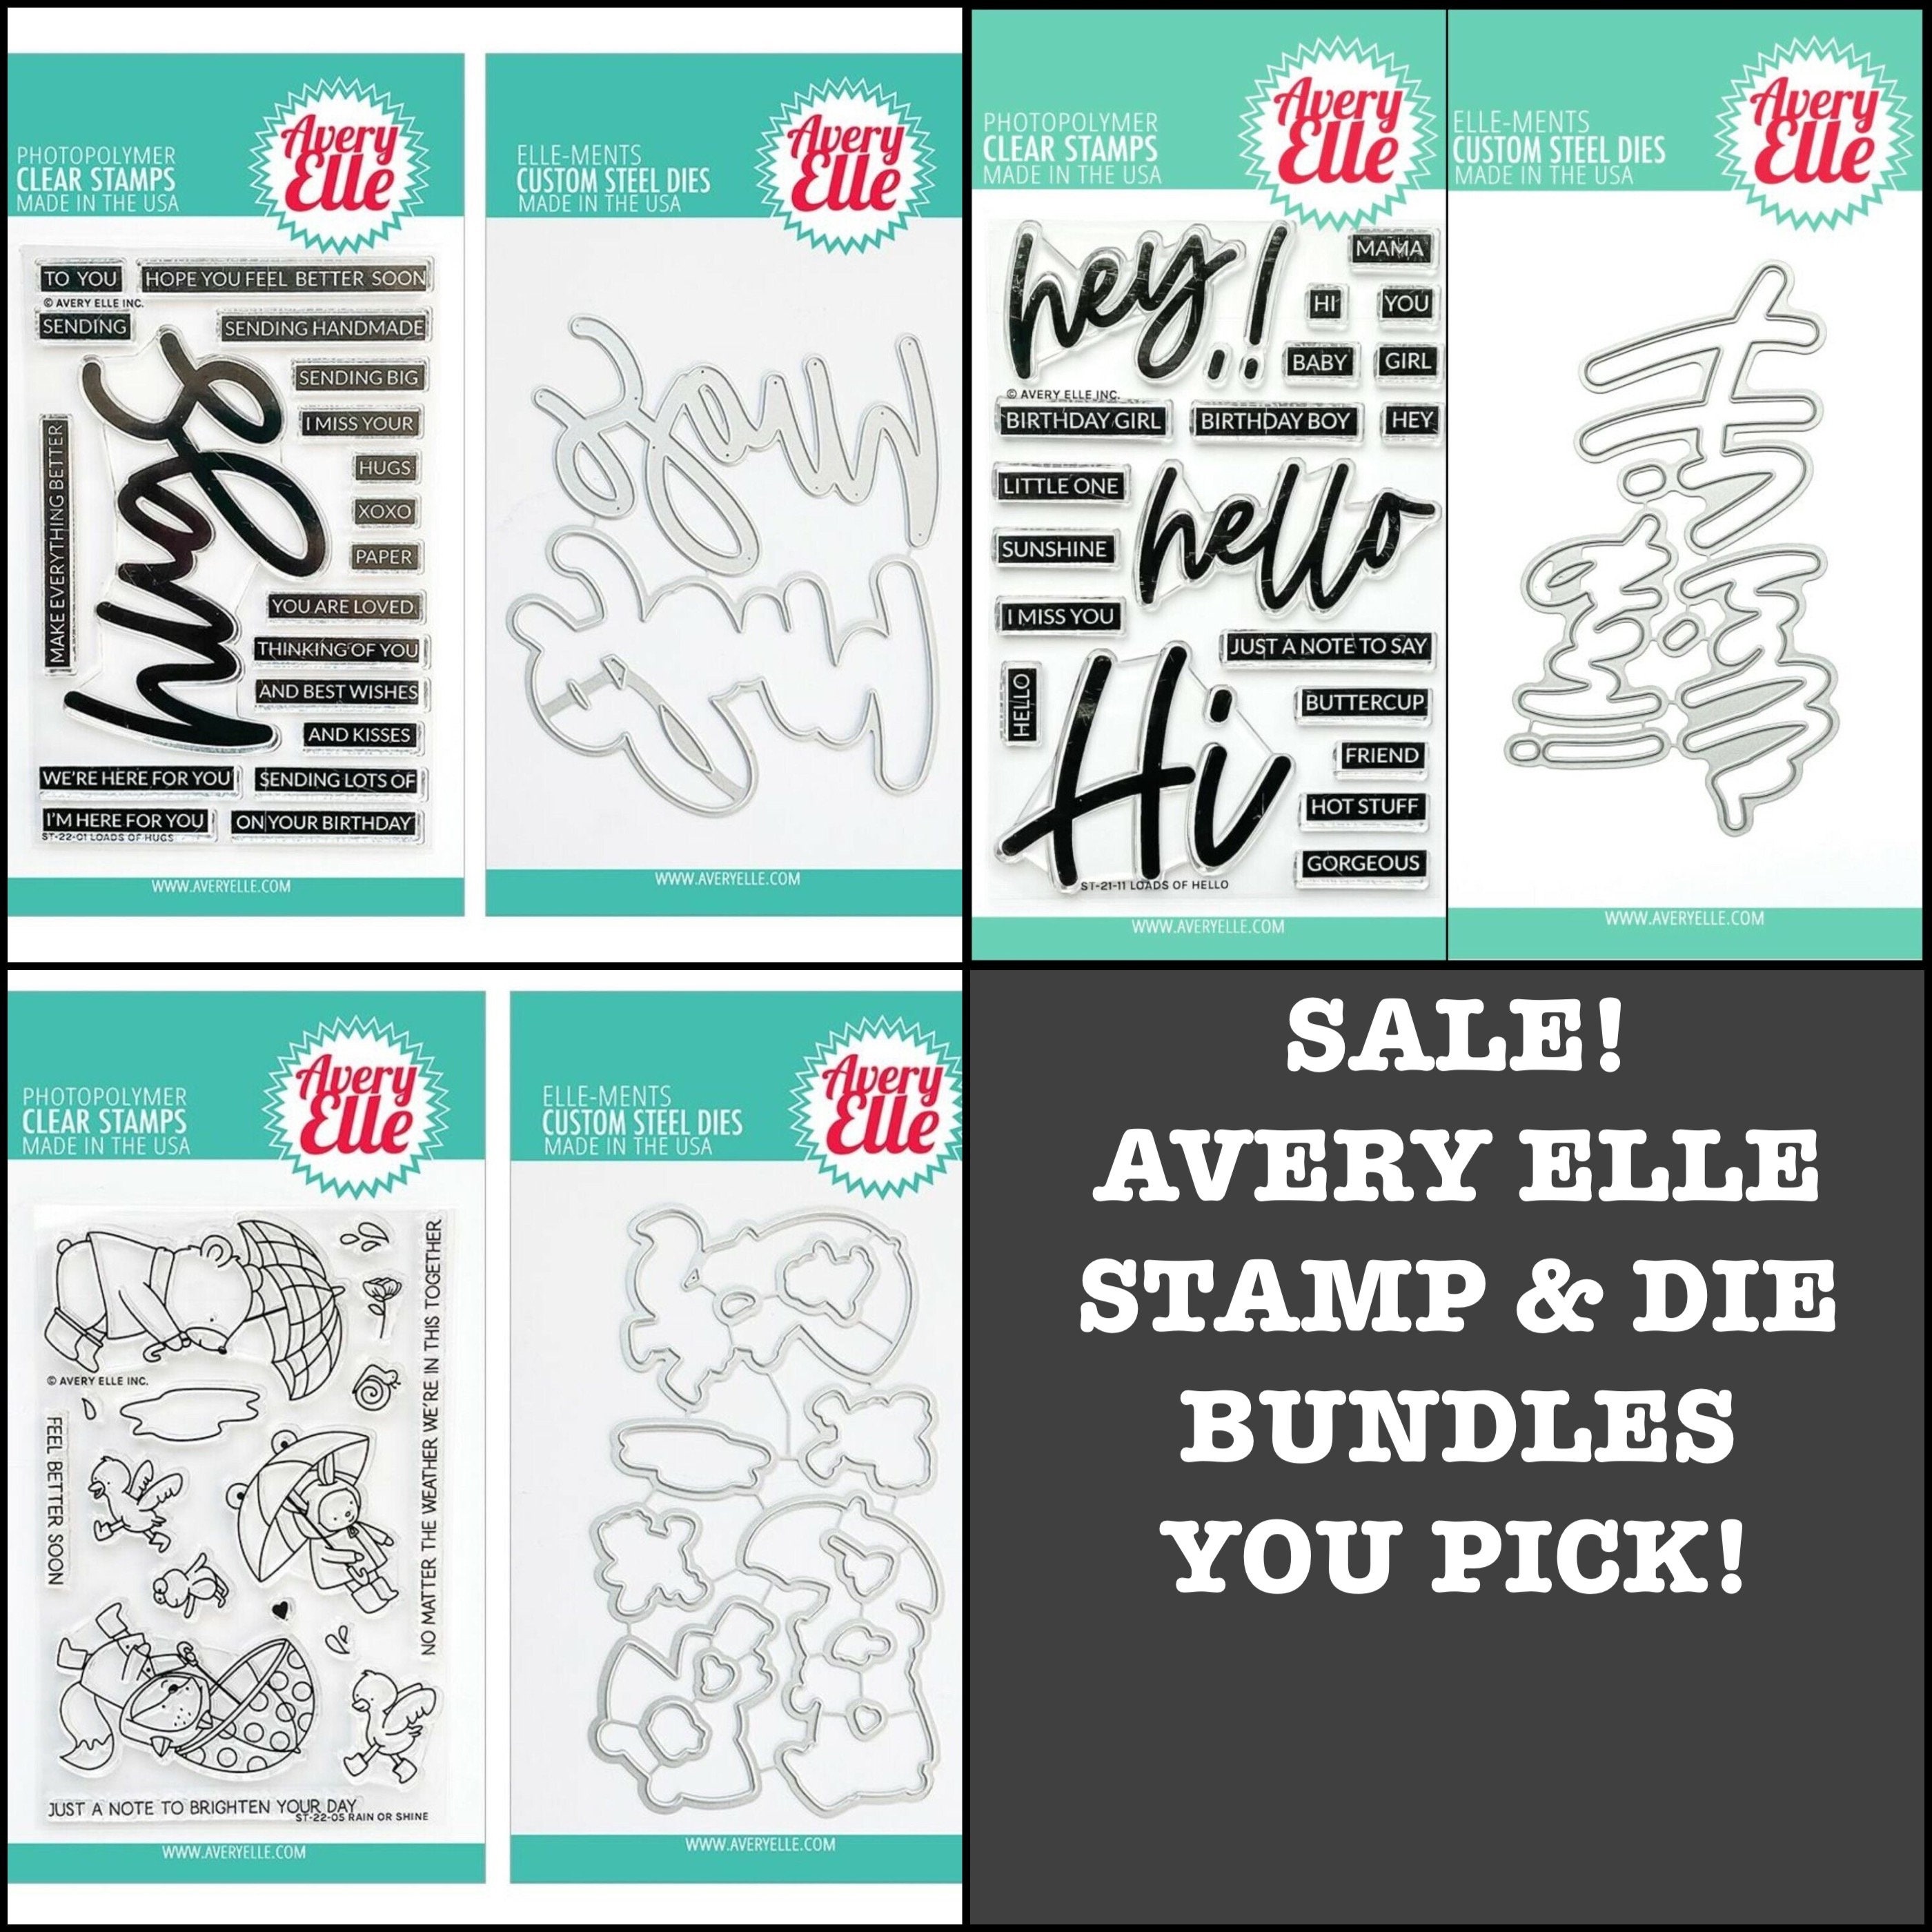 Hot Off The Press Acrylic Stamps, 8 by 8-inch, Janie's Christmas Kids